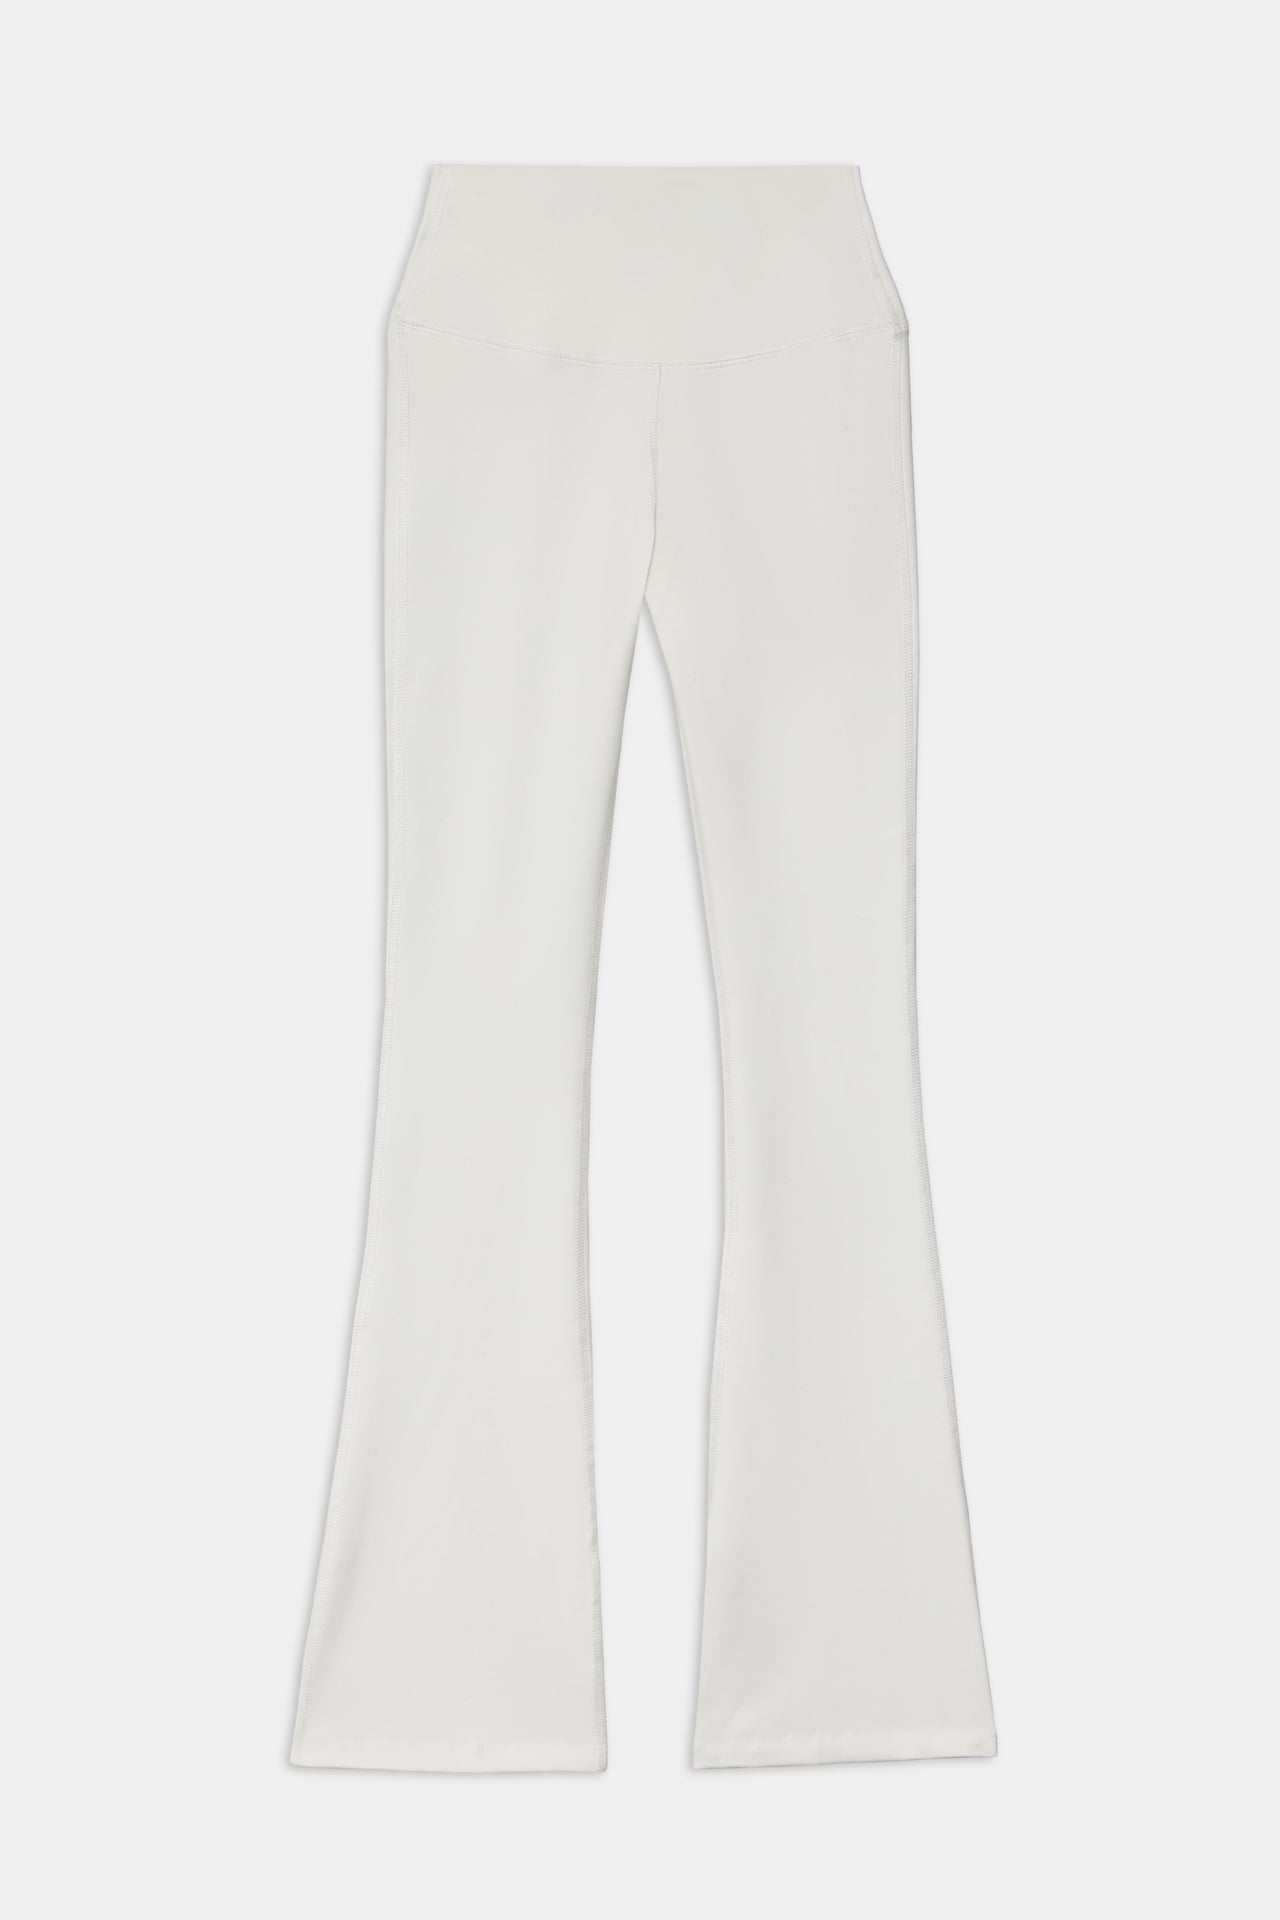 Front flat view of white high waist below ankle length legging with wide flared bottoms